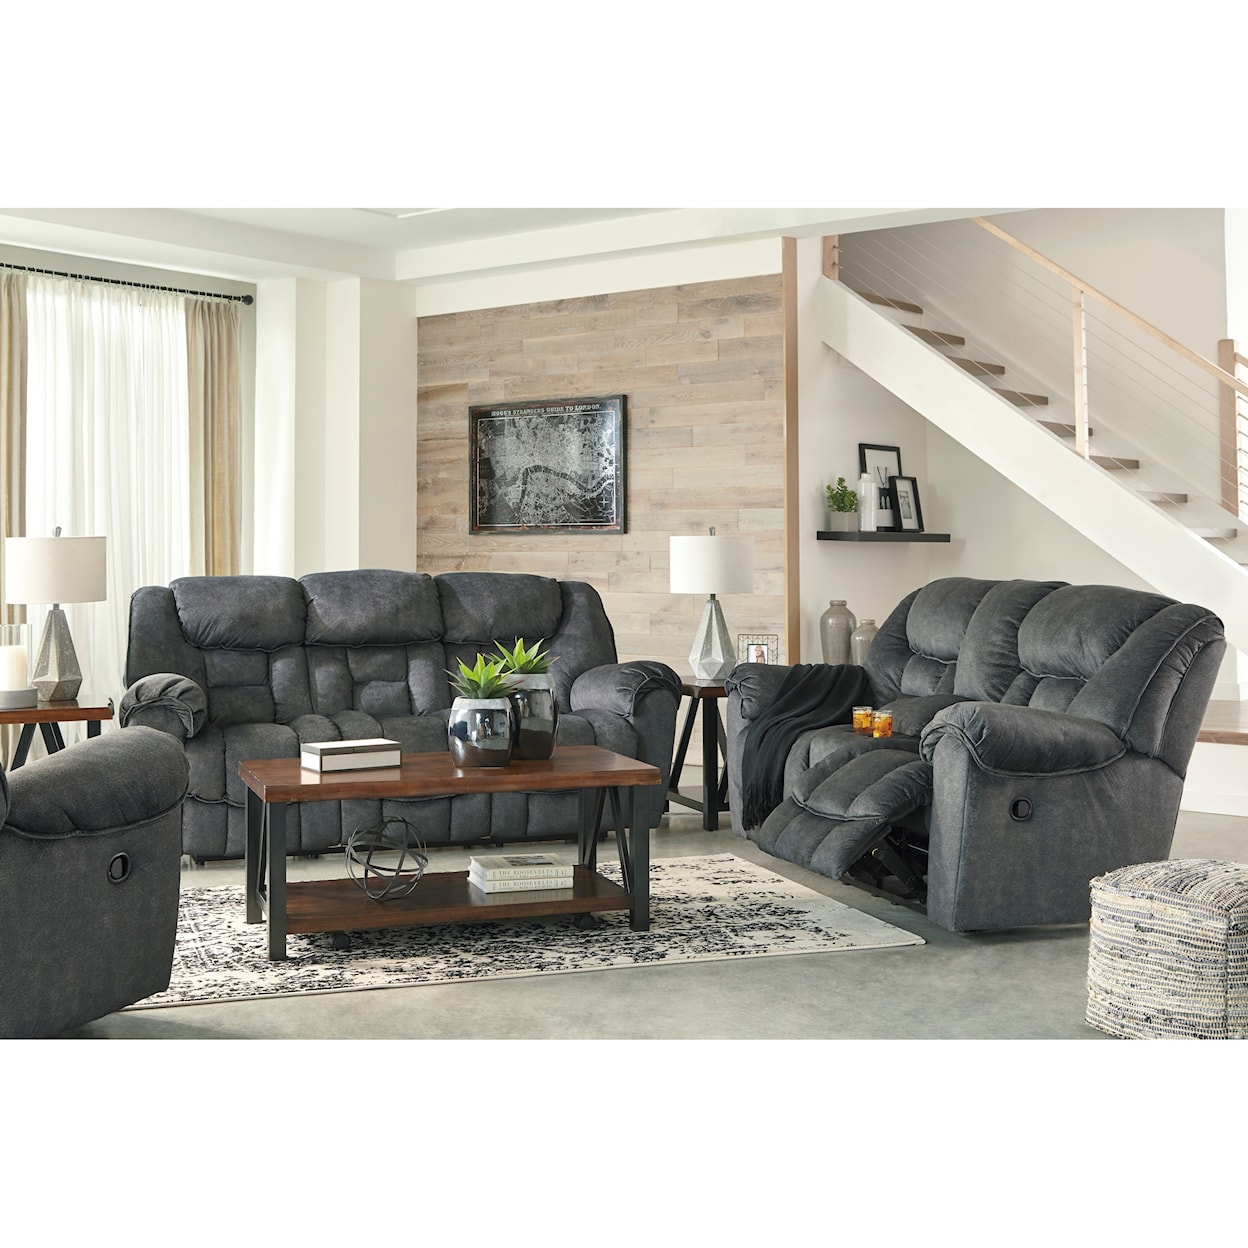 Ashley Furniture Signature Design Capehorn Reclining Living Room Group